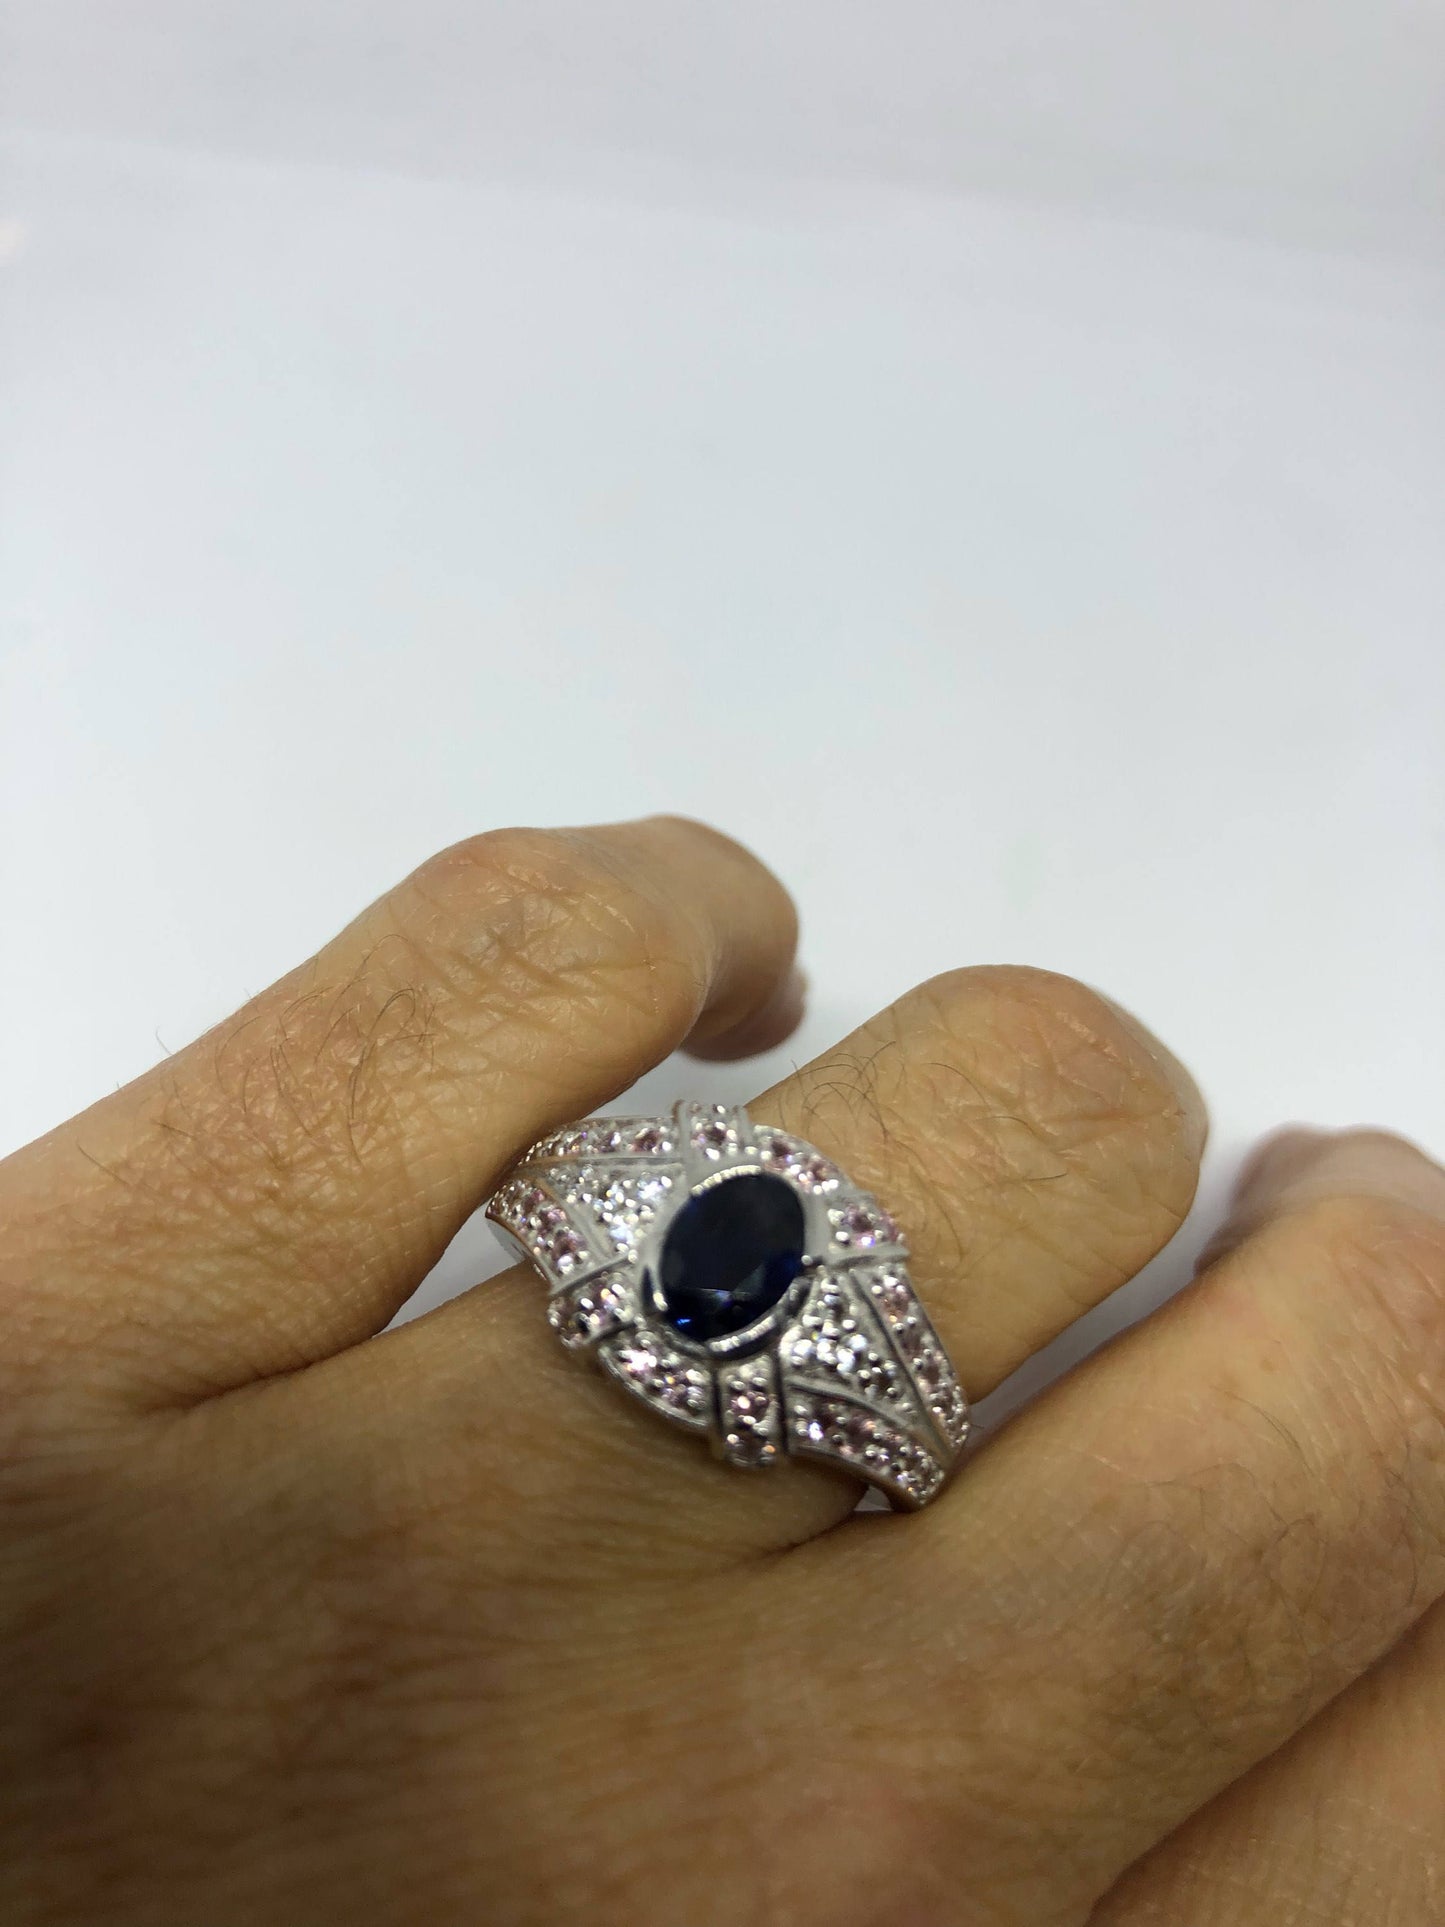 Vintage Handmade Deep Blue Sapphire and White 925 Sterling Silver Gothic Ring